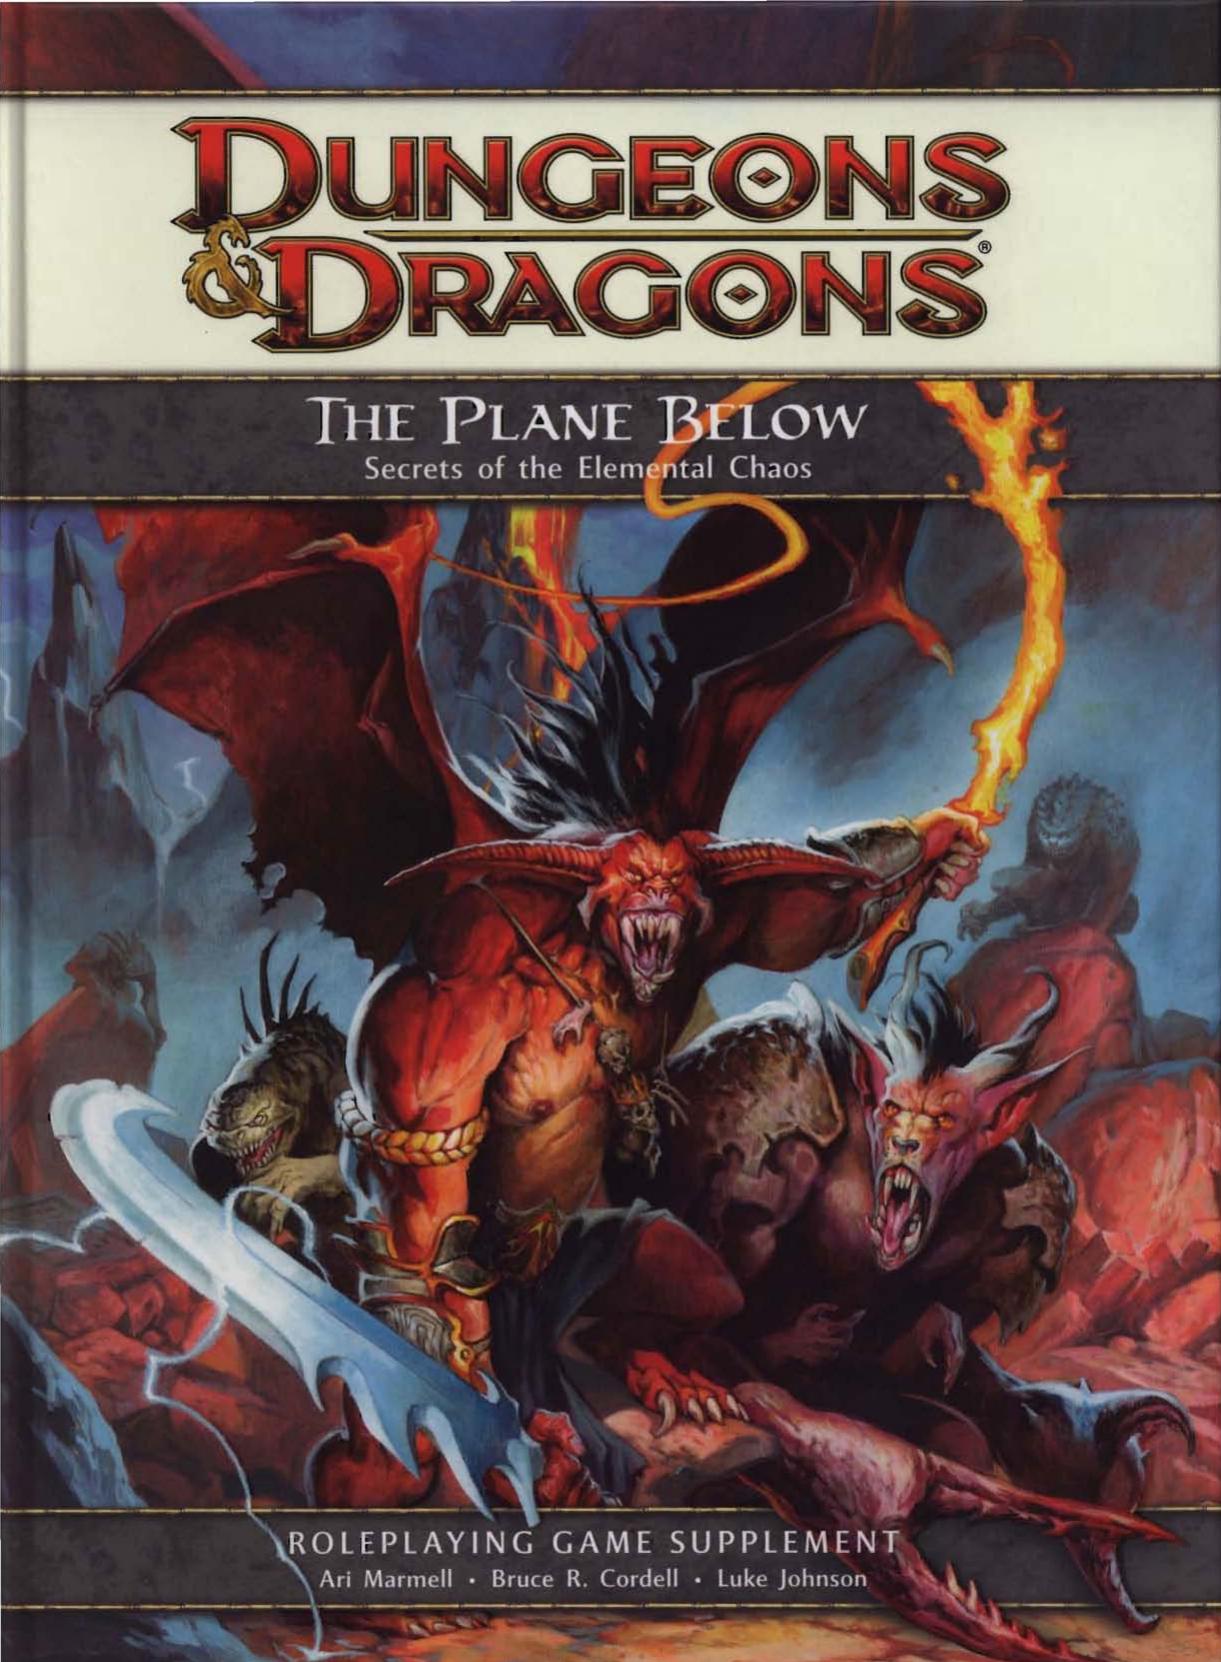 The Plane Below: Secrets of the Elemental Chaos: A 4th Edition D&D Supplement